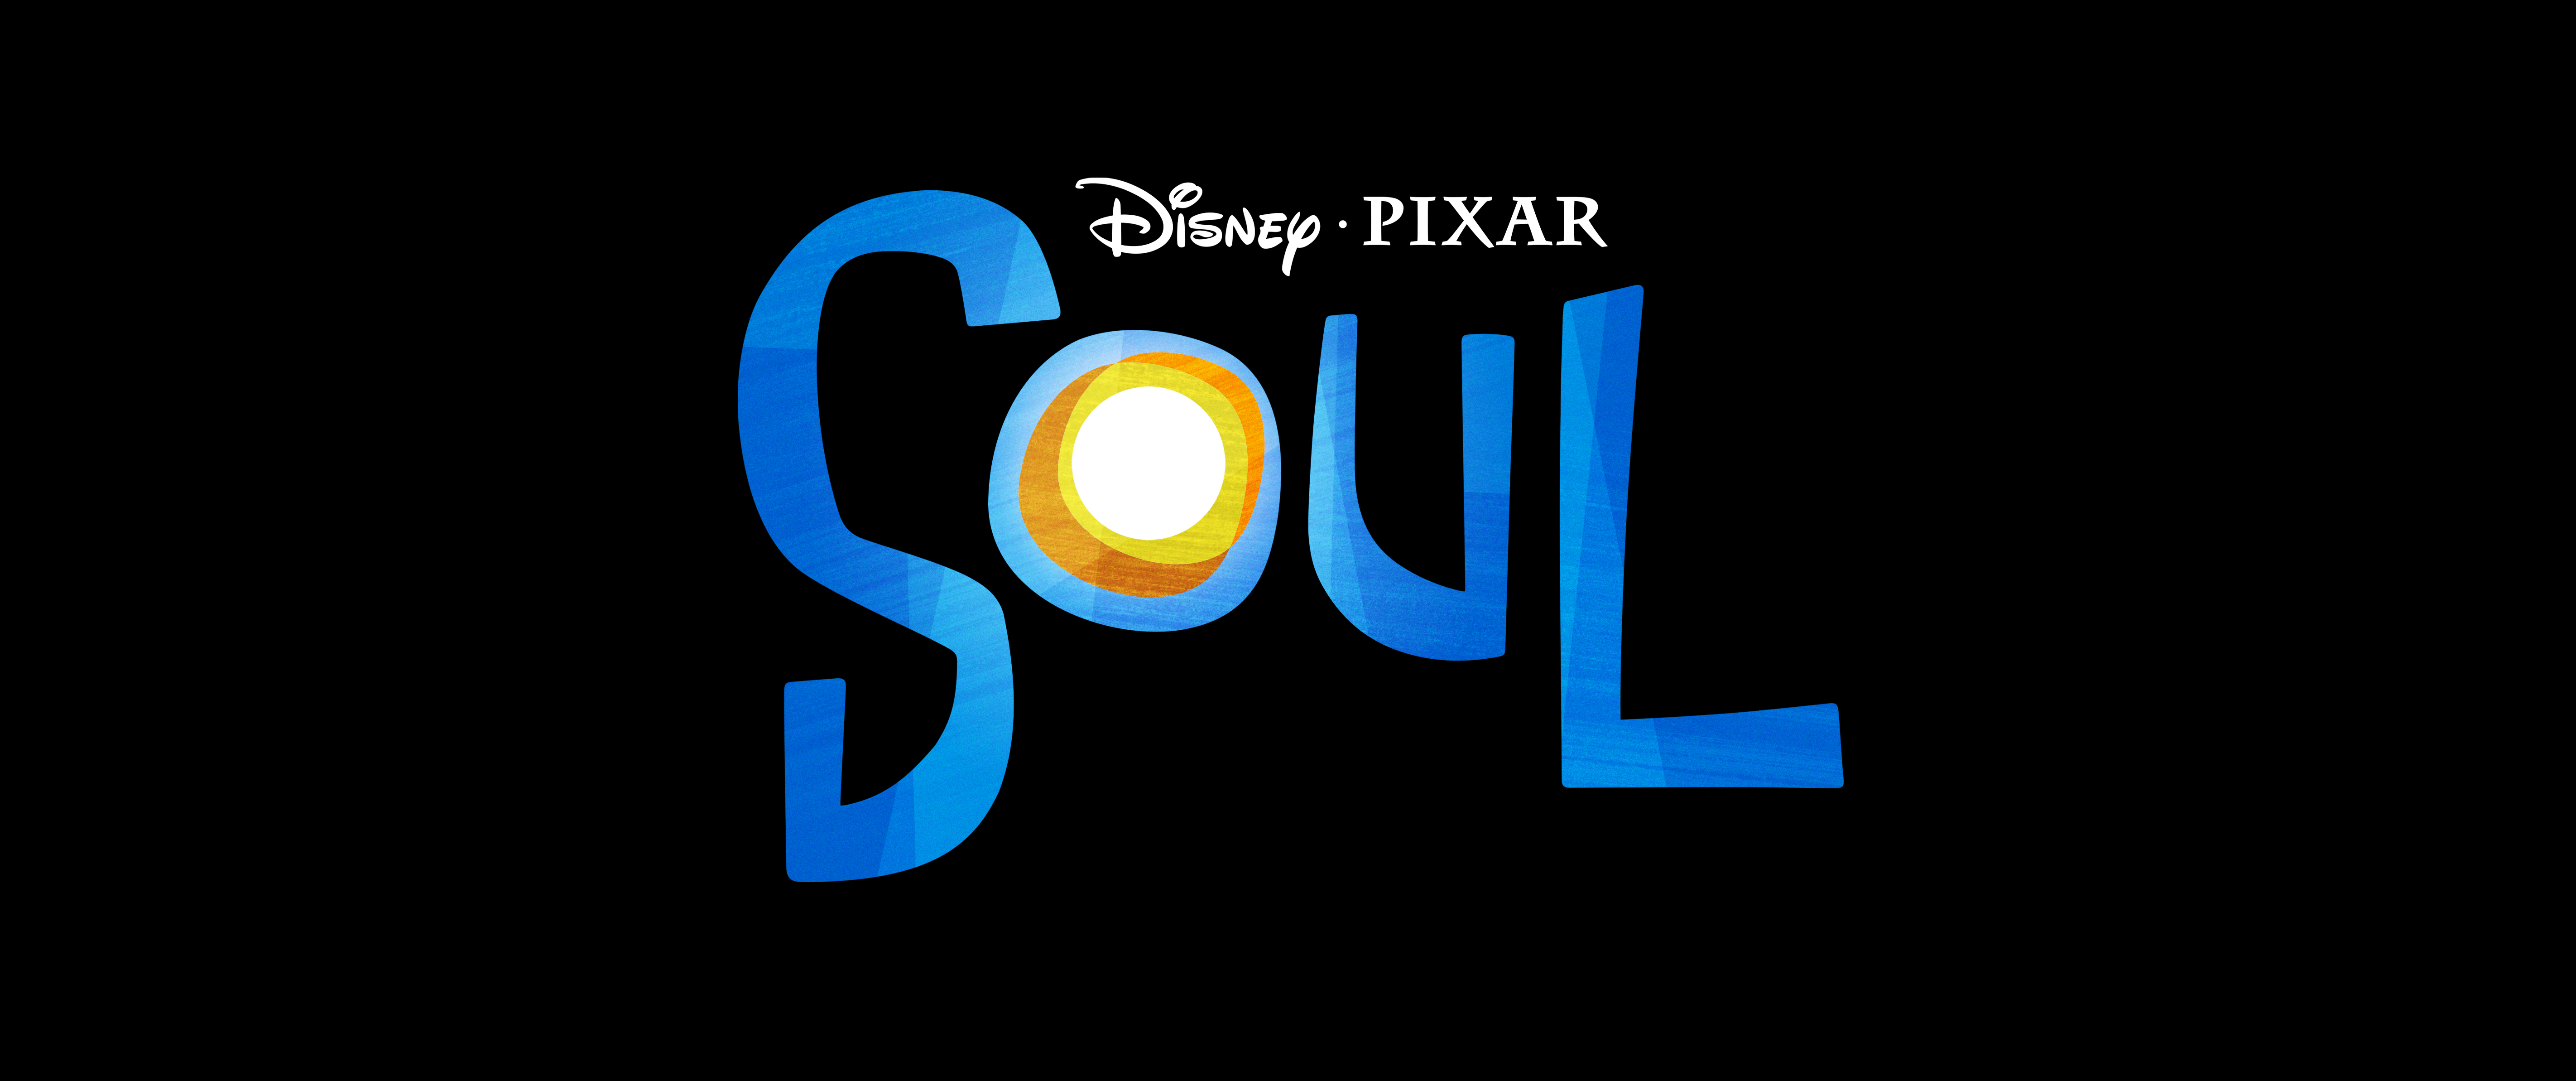 All new movie from Pixar “Soul” coming to theaters in 2020